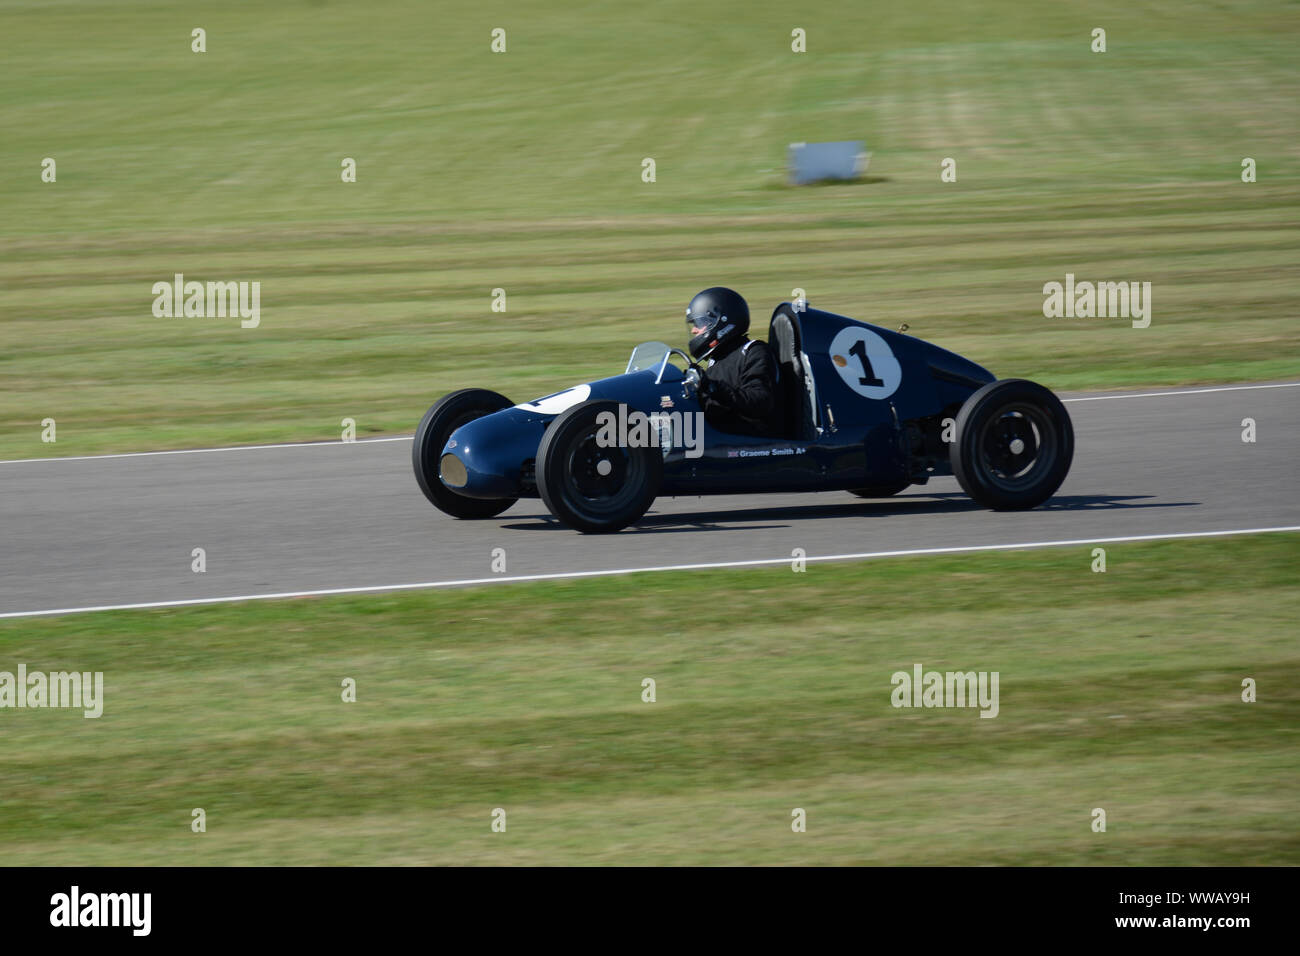 Goodwood Revival 13th September 2019 - Earl of March Trophy 500cc - 1949 Bardon Turner-JAP driven by Graeme Smith Stock Photo